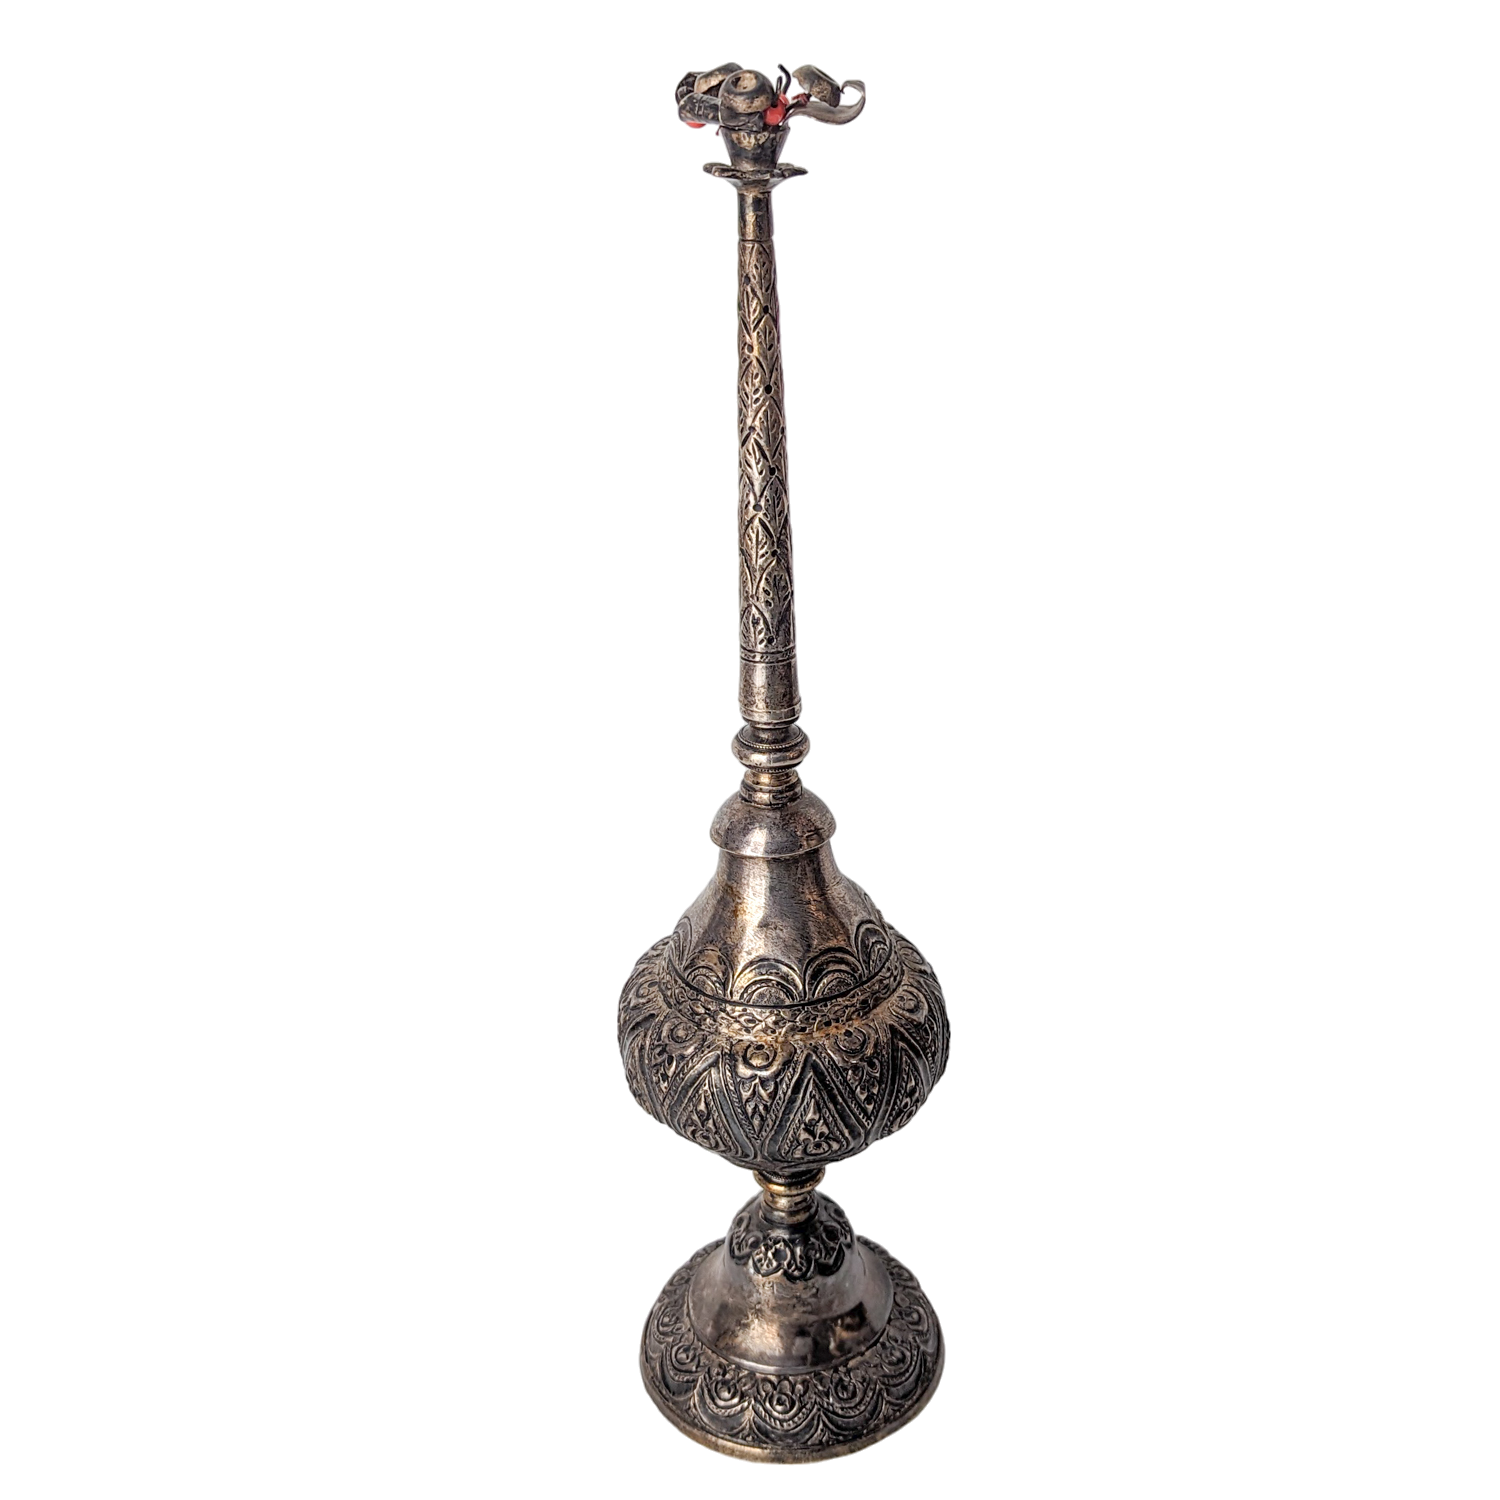 Antique Repousse Silver Rose Water Sprinkler